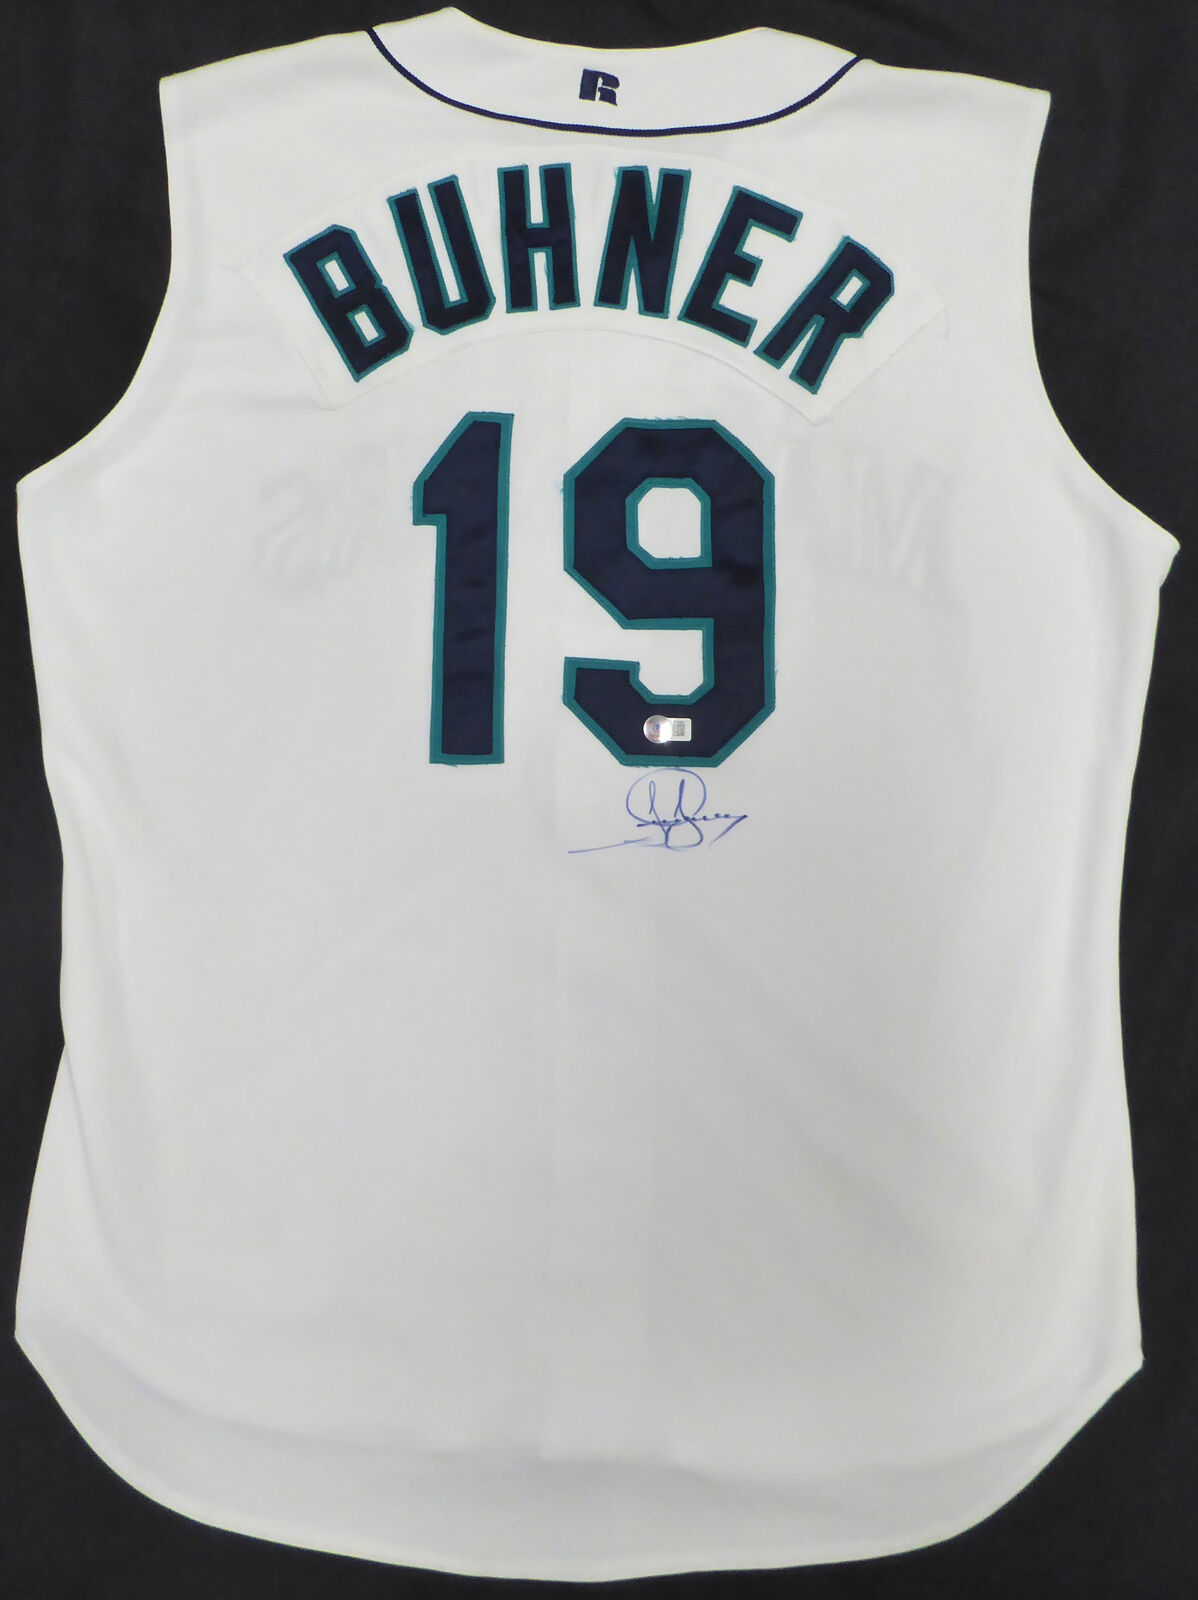 Mariners Jay Buhner Autographed White Russell Jersey 1998 Home